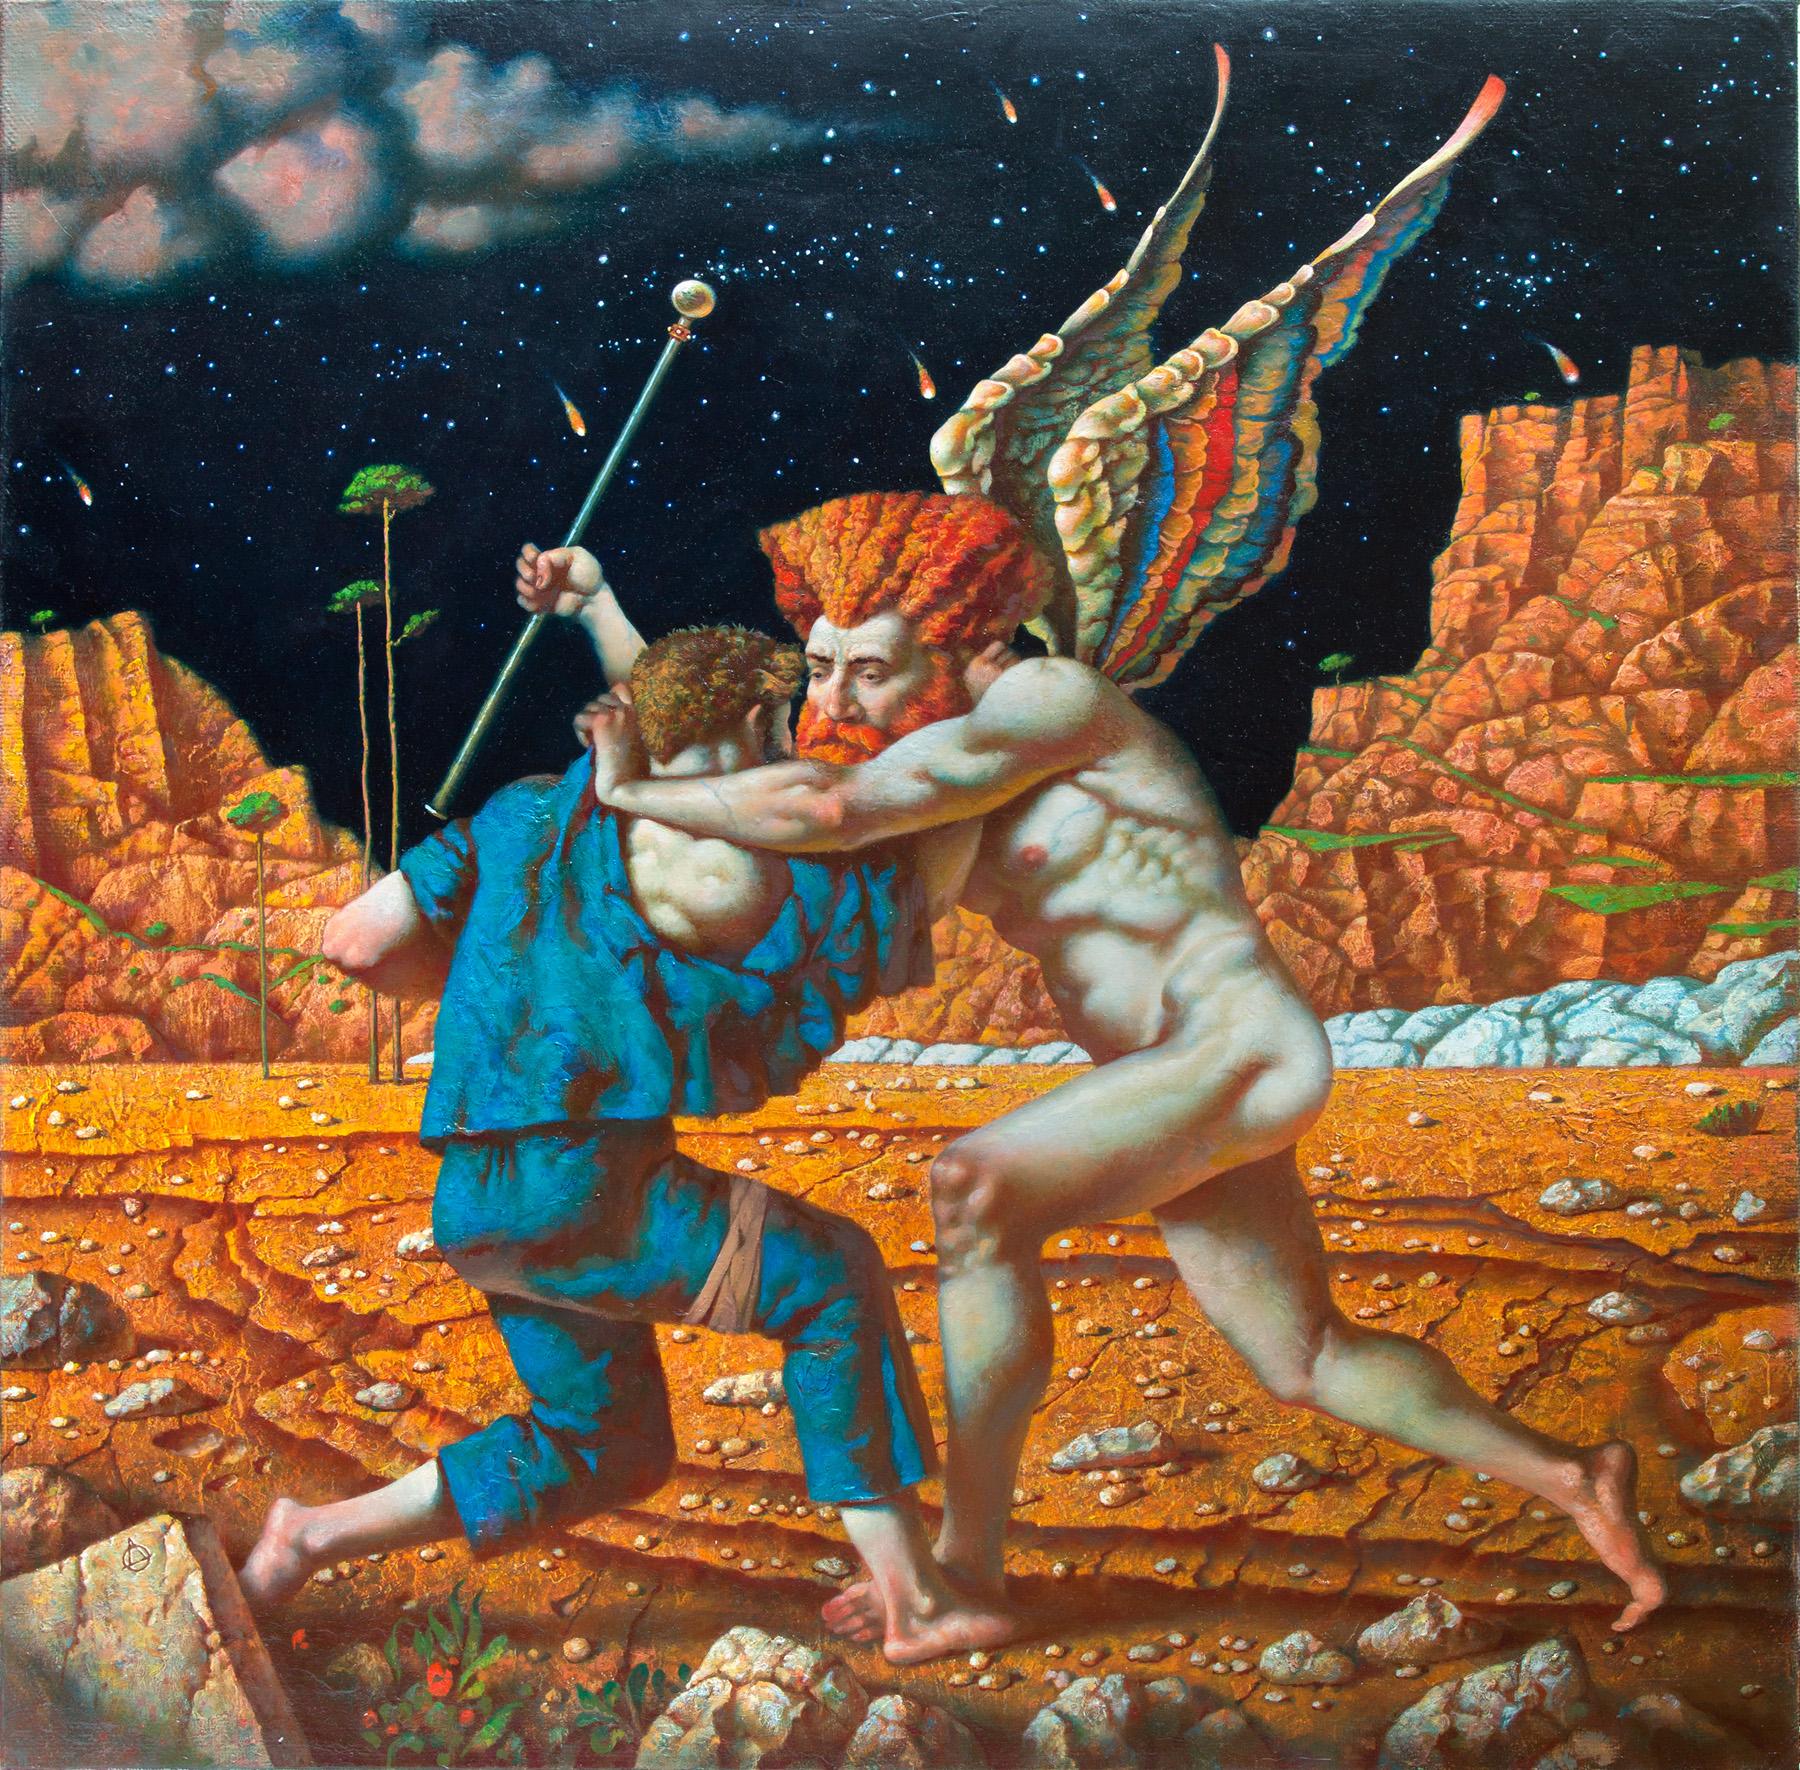 Battle of Jacob with the angel. Original modern art painting